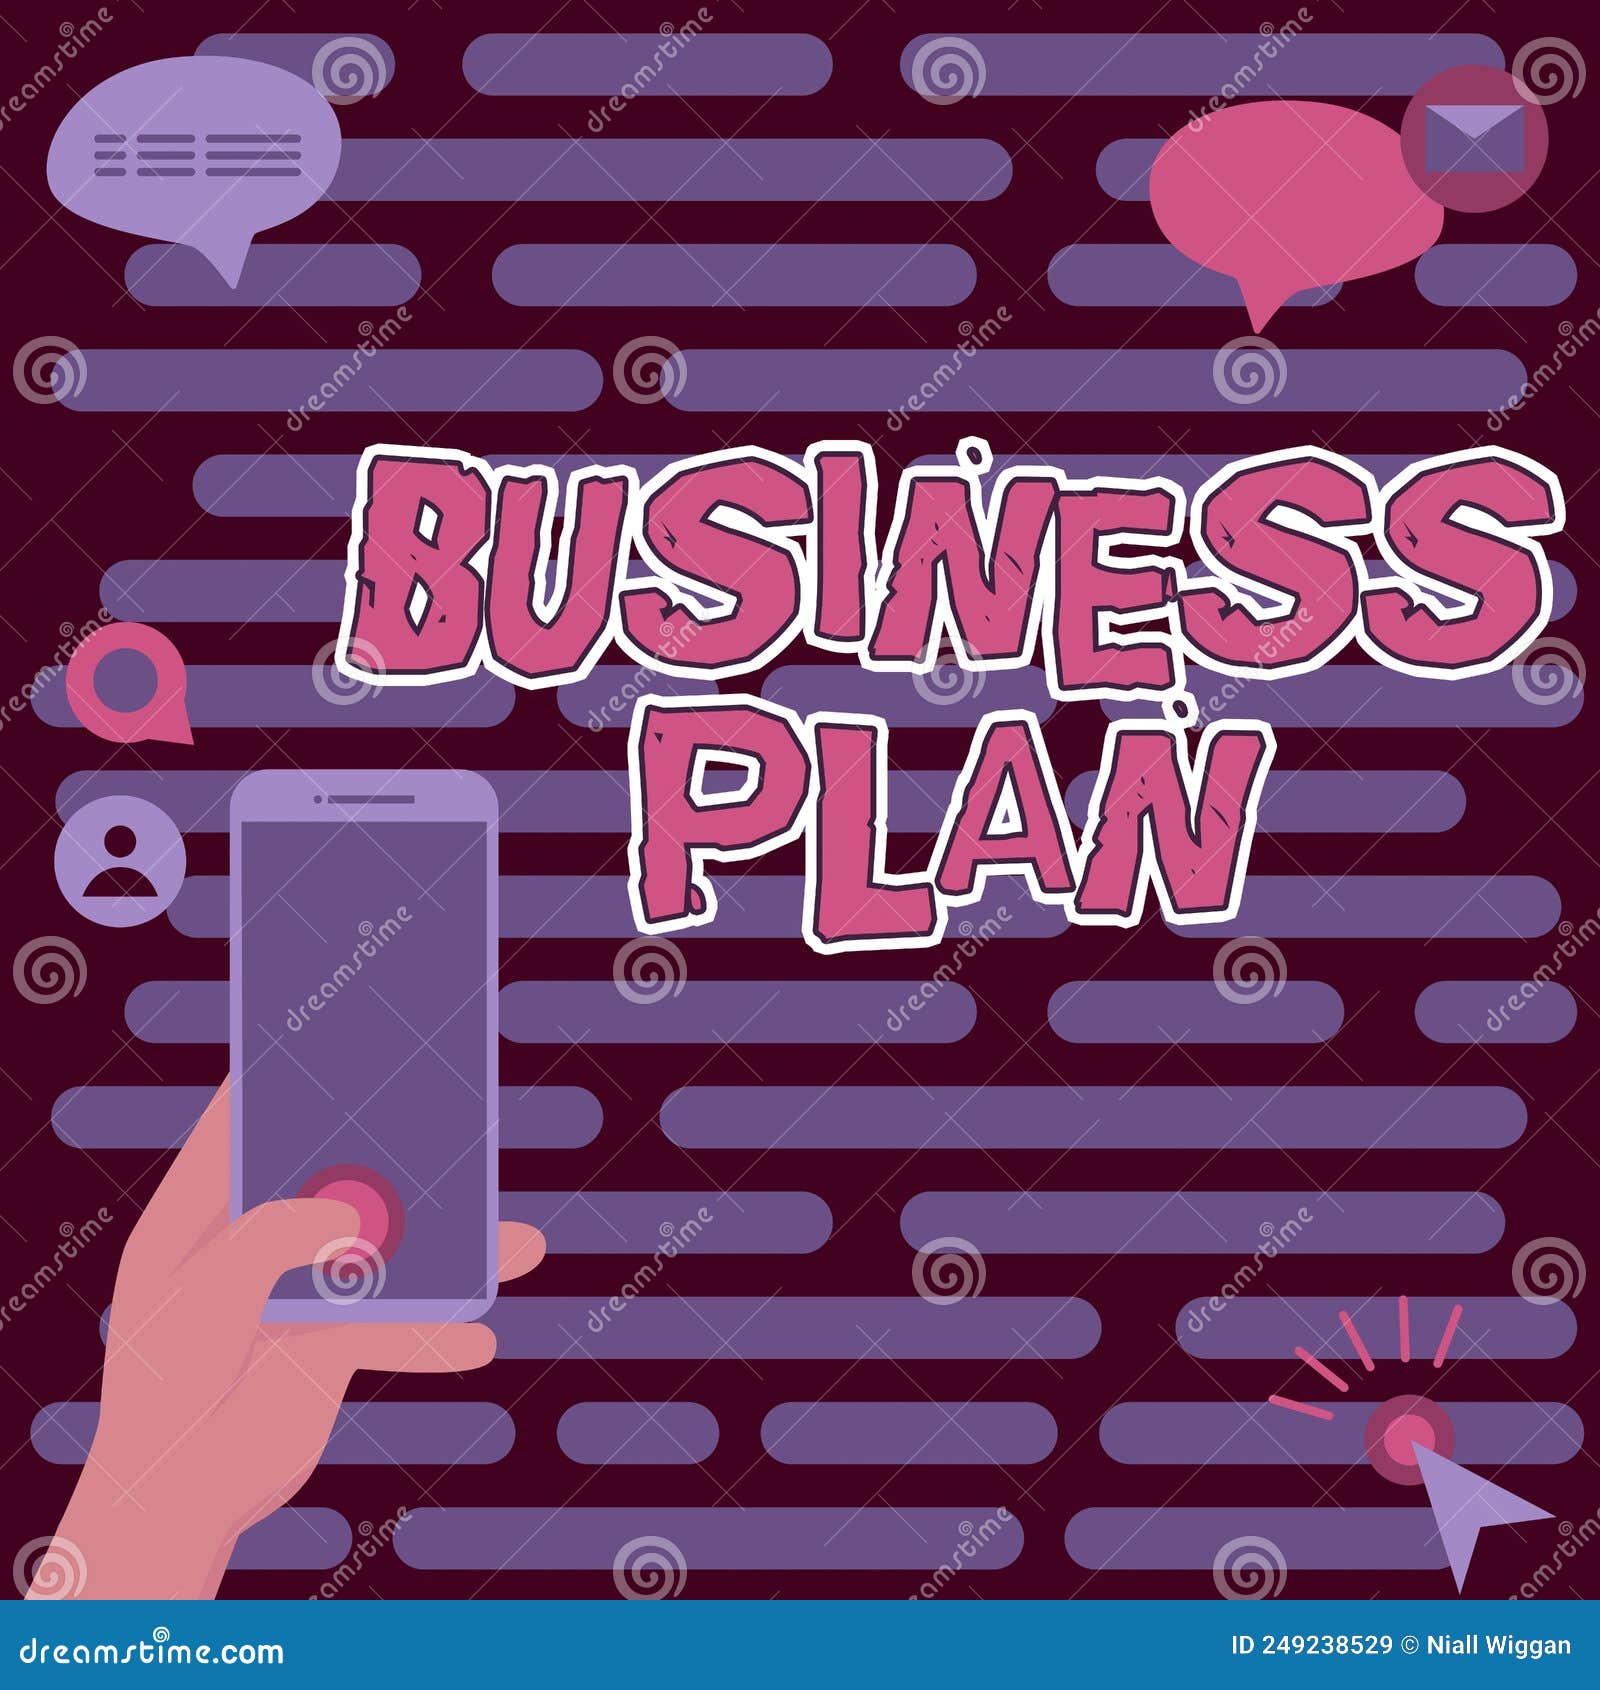 business plan internet meaning